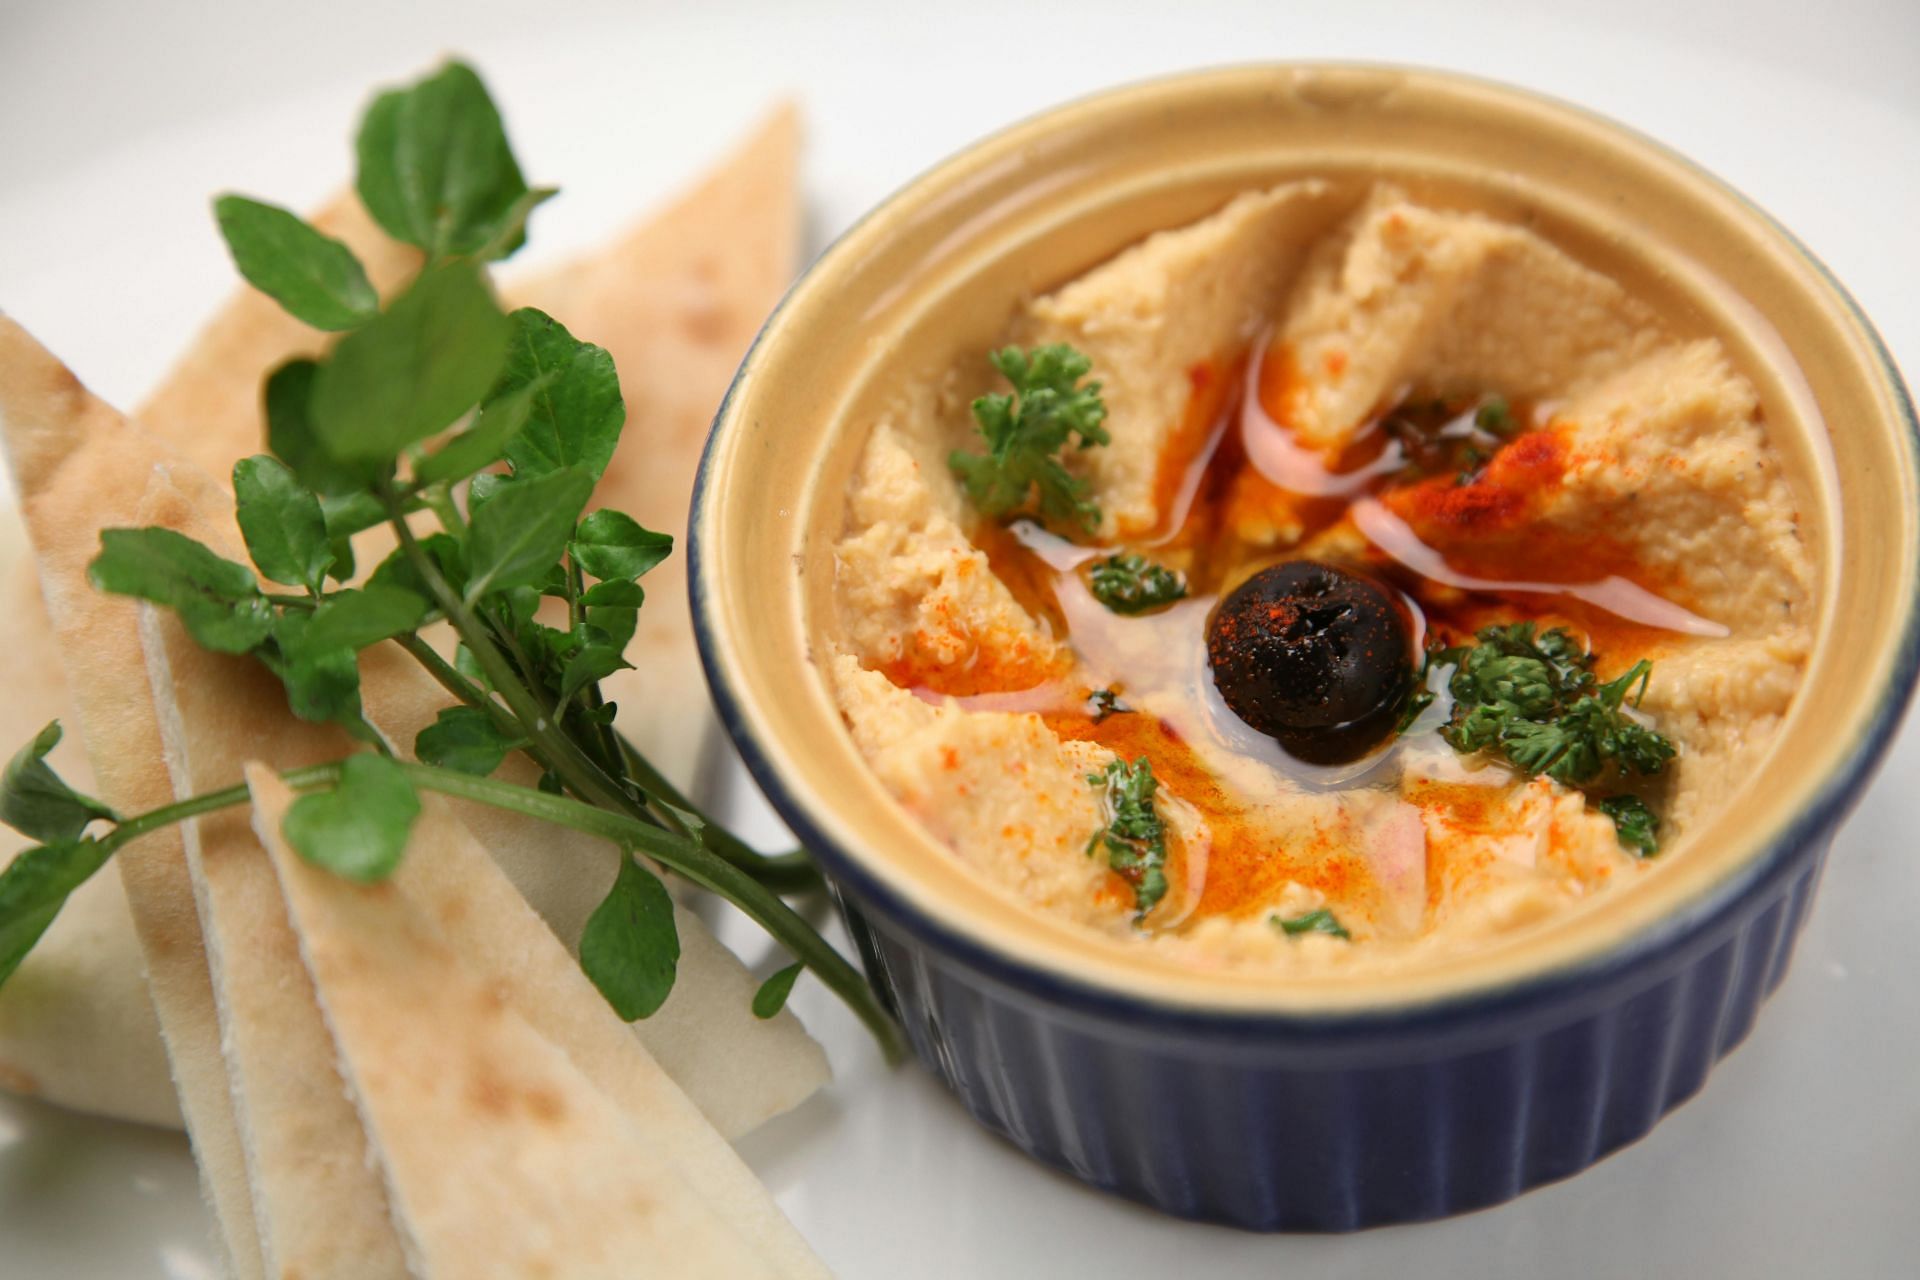 Importance of Healthy hummus recipe (image sourced via Pexels / Photo by zak)